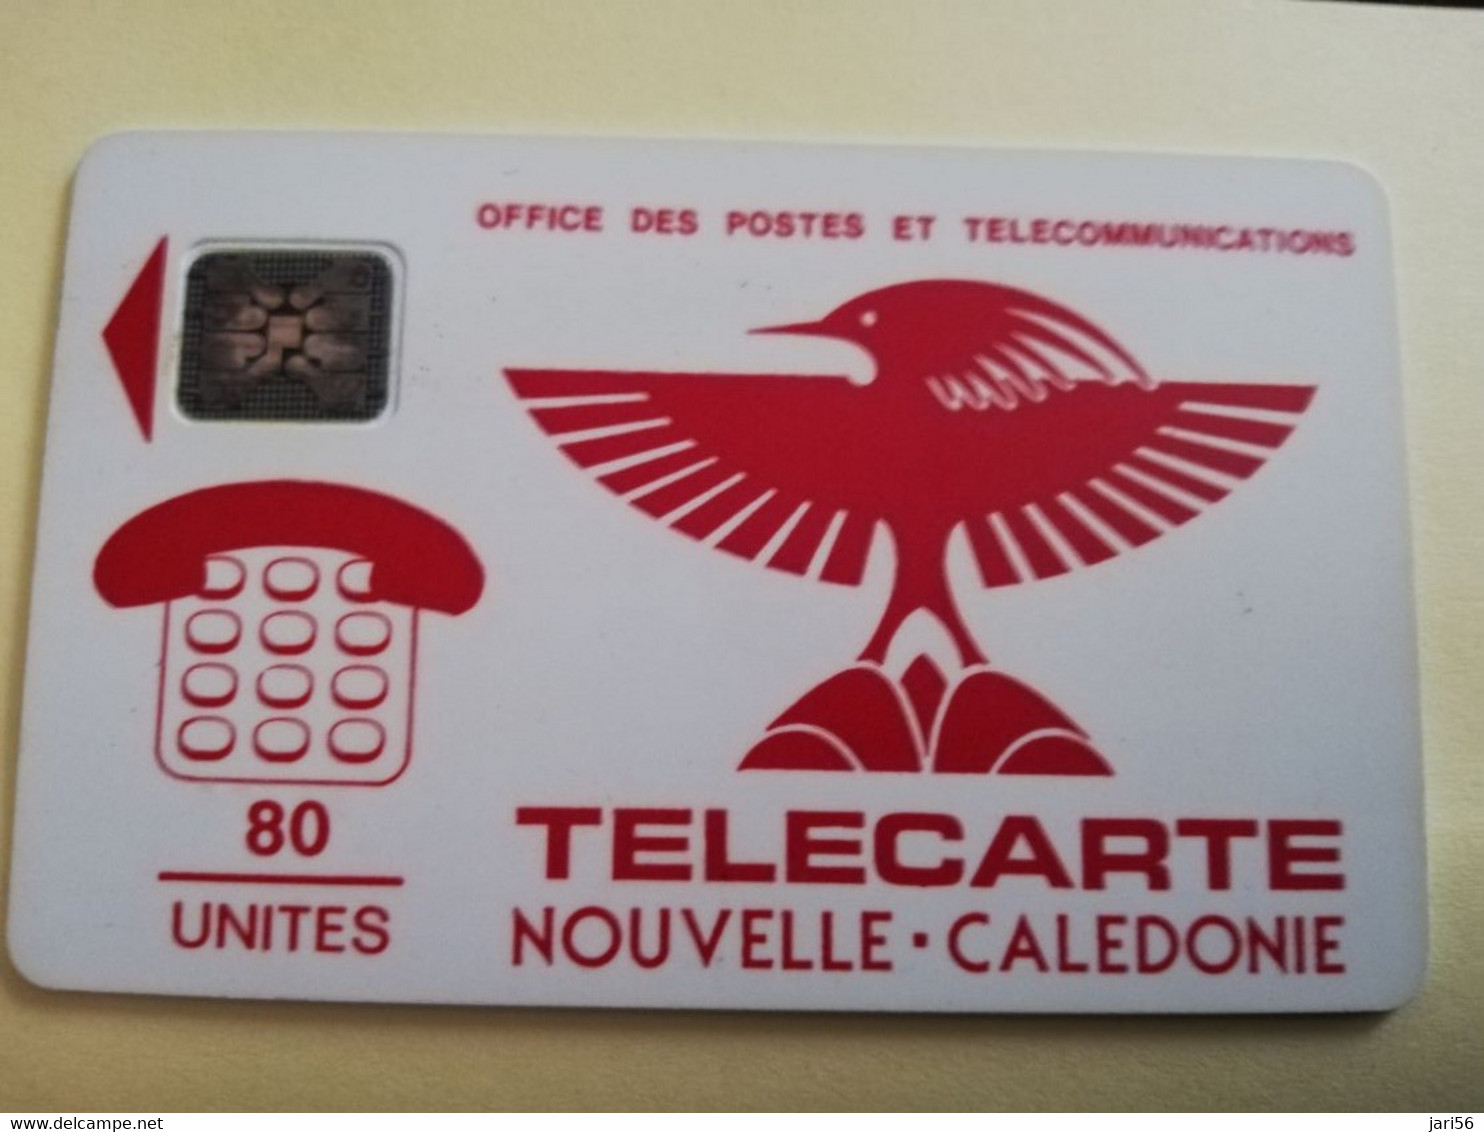 NOUVELLE CALEDONIA  CHIP CARD 85 UNITS BIRD LOGO  RED   ** 3485 ** - New Caledonia